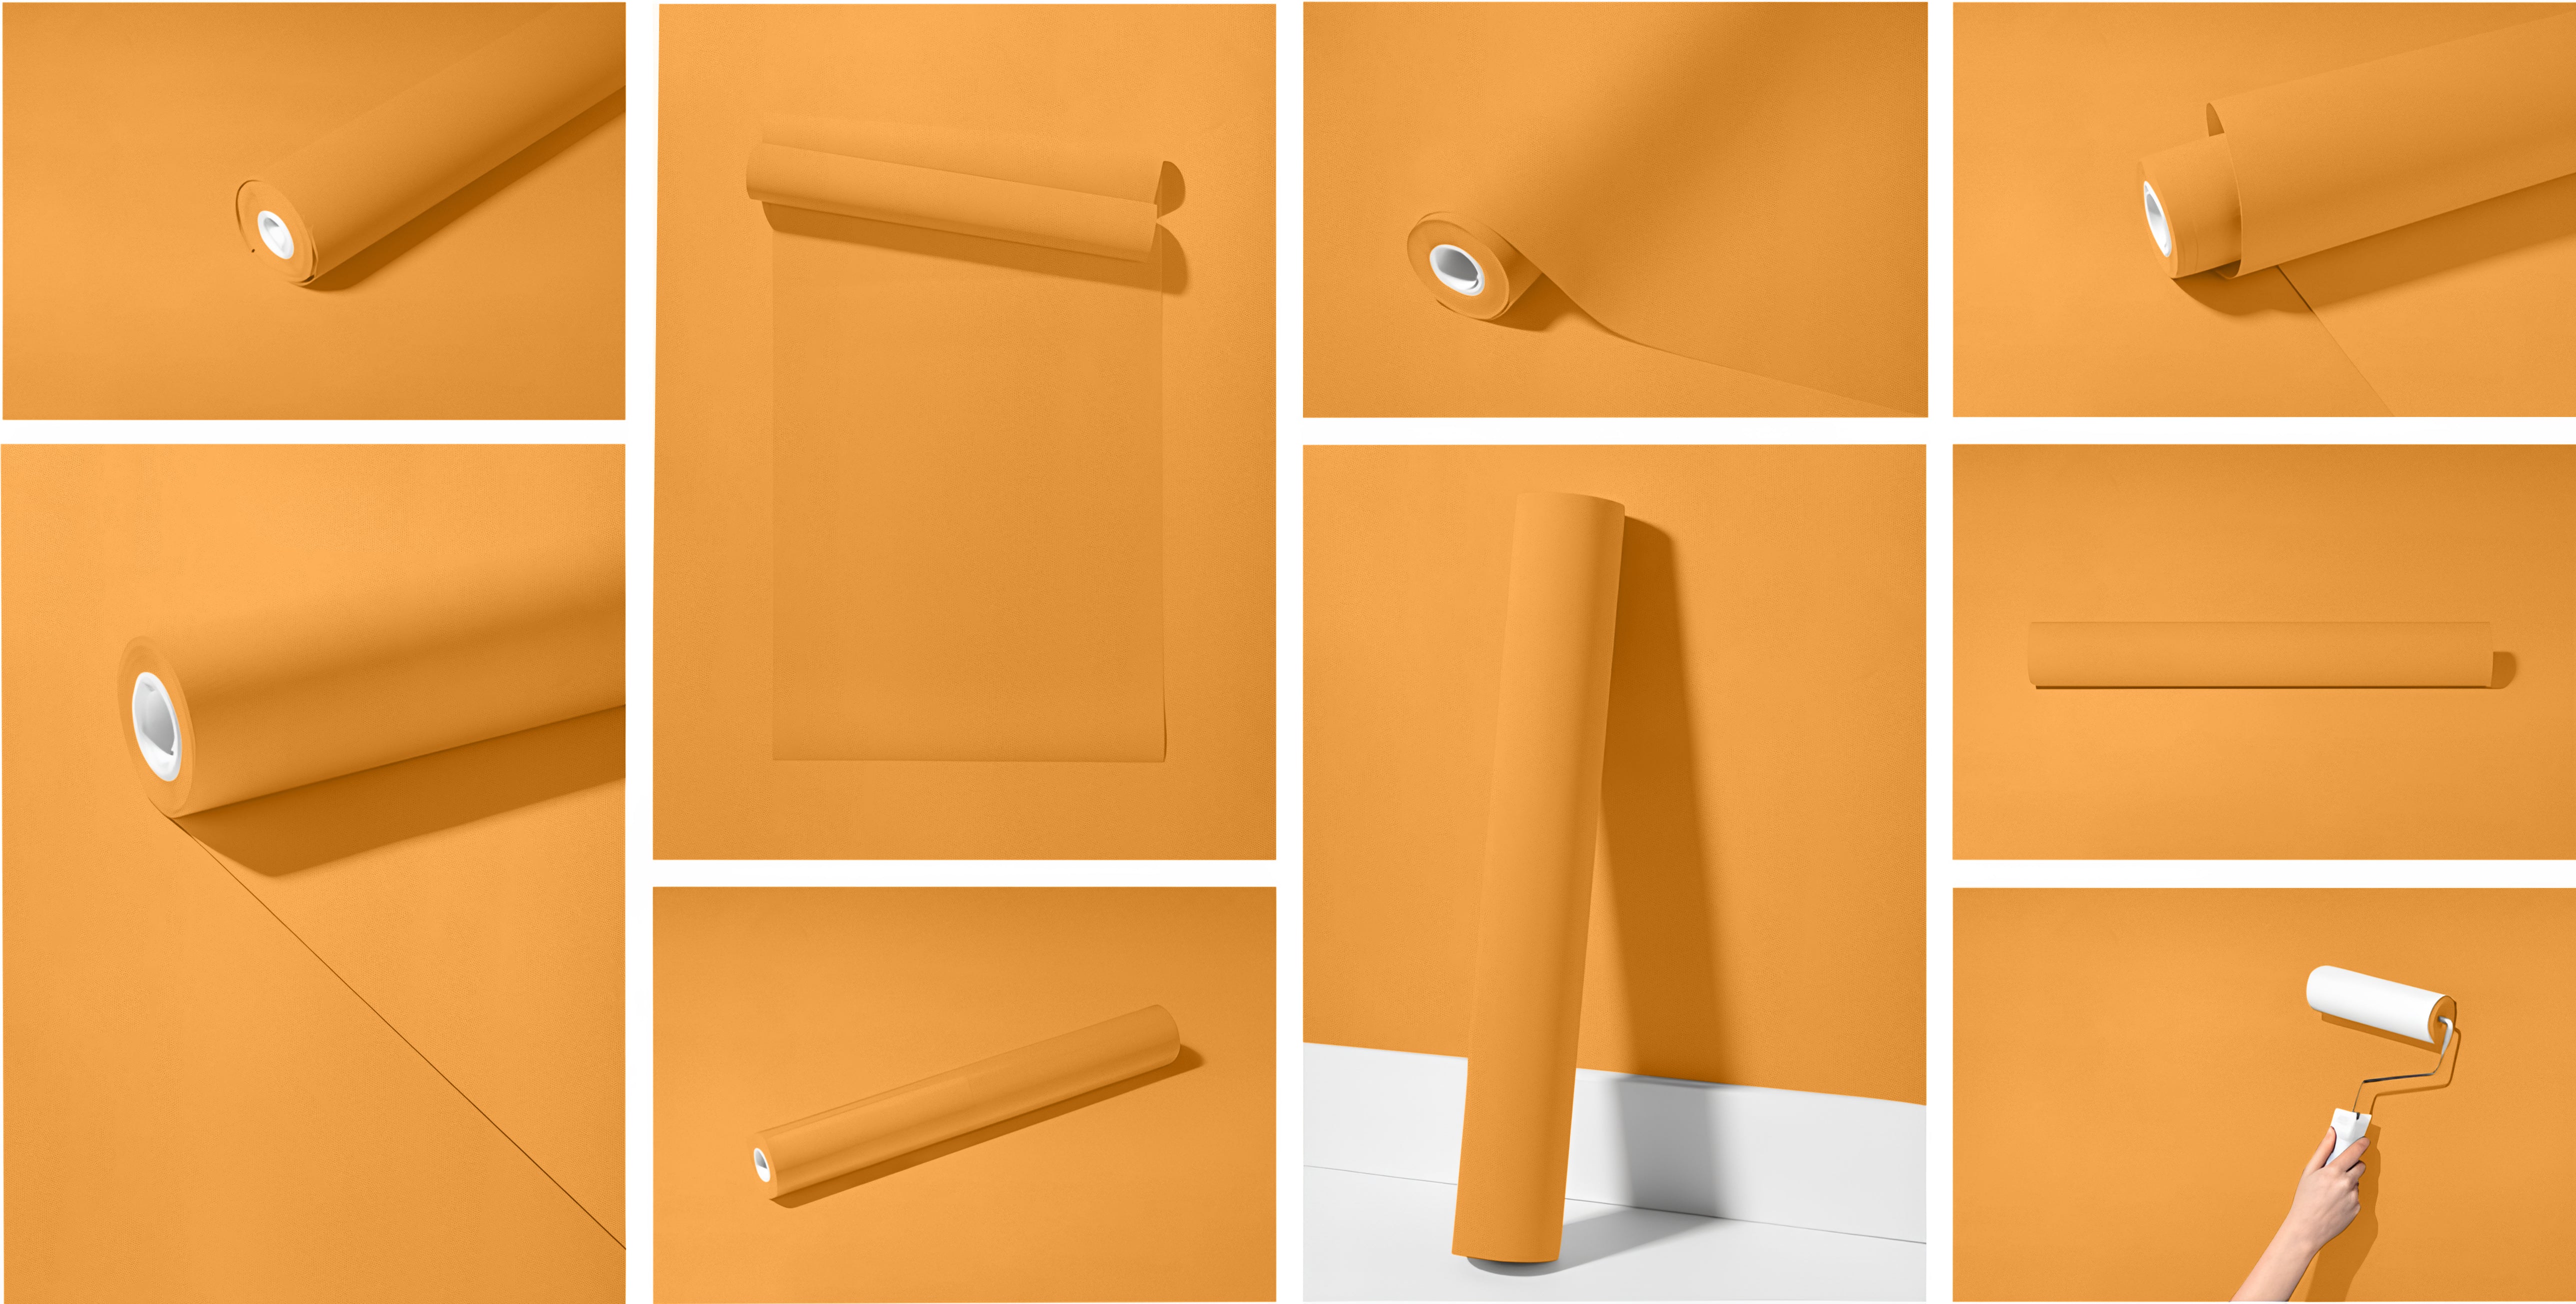 Peel & Stick Removable Re-usable Paint - Color RAL 1017 Saffron Yellow - offRAL™ - RALRAW LLC, USA